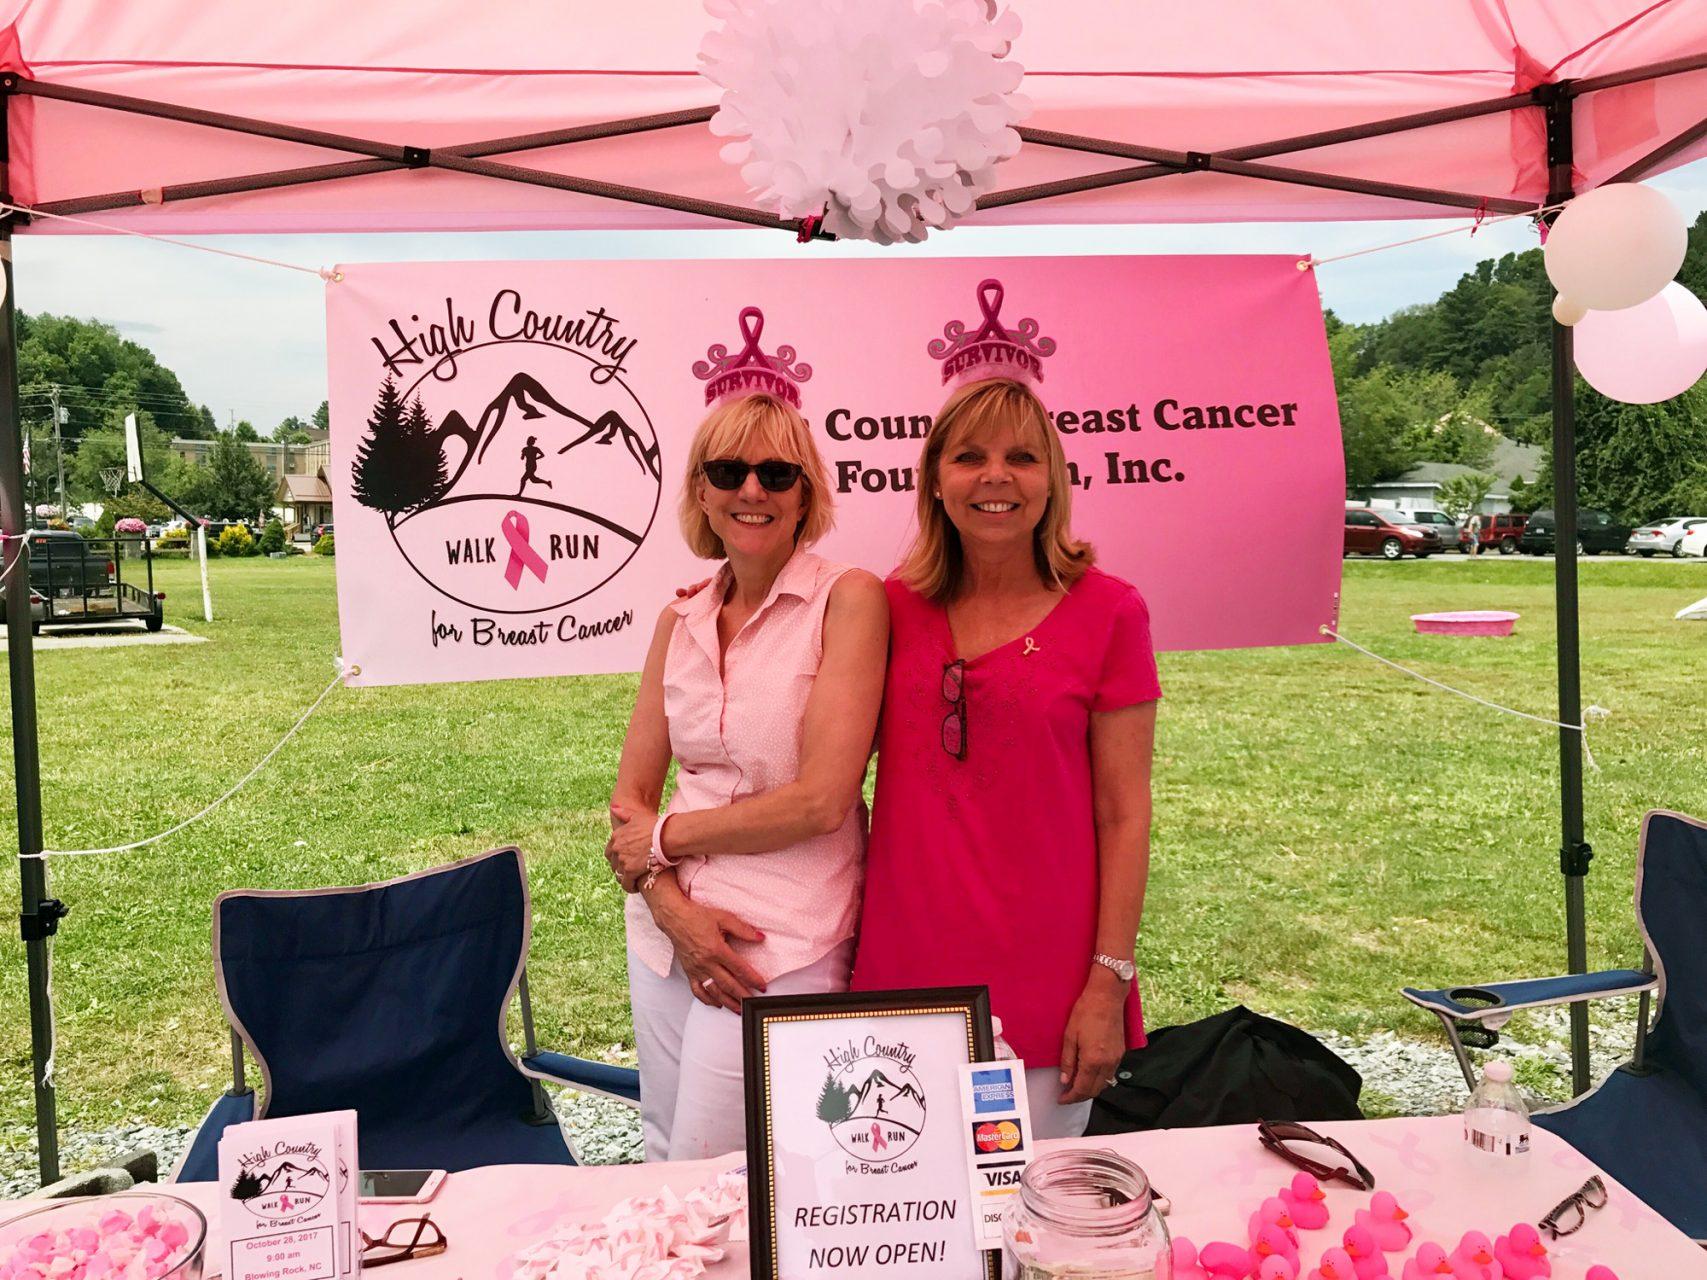 Members+of+the+High+Country+Breast+Cancer+Foundation+set+up+a+sign-up+booth+for+the+Breast+Cancer+Run%2FWalk%2C+taking+place+on+Oct.+28.